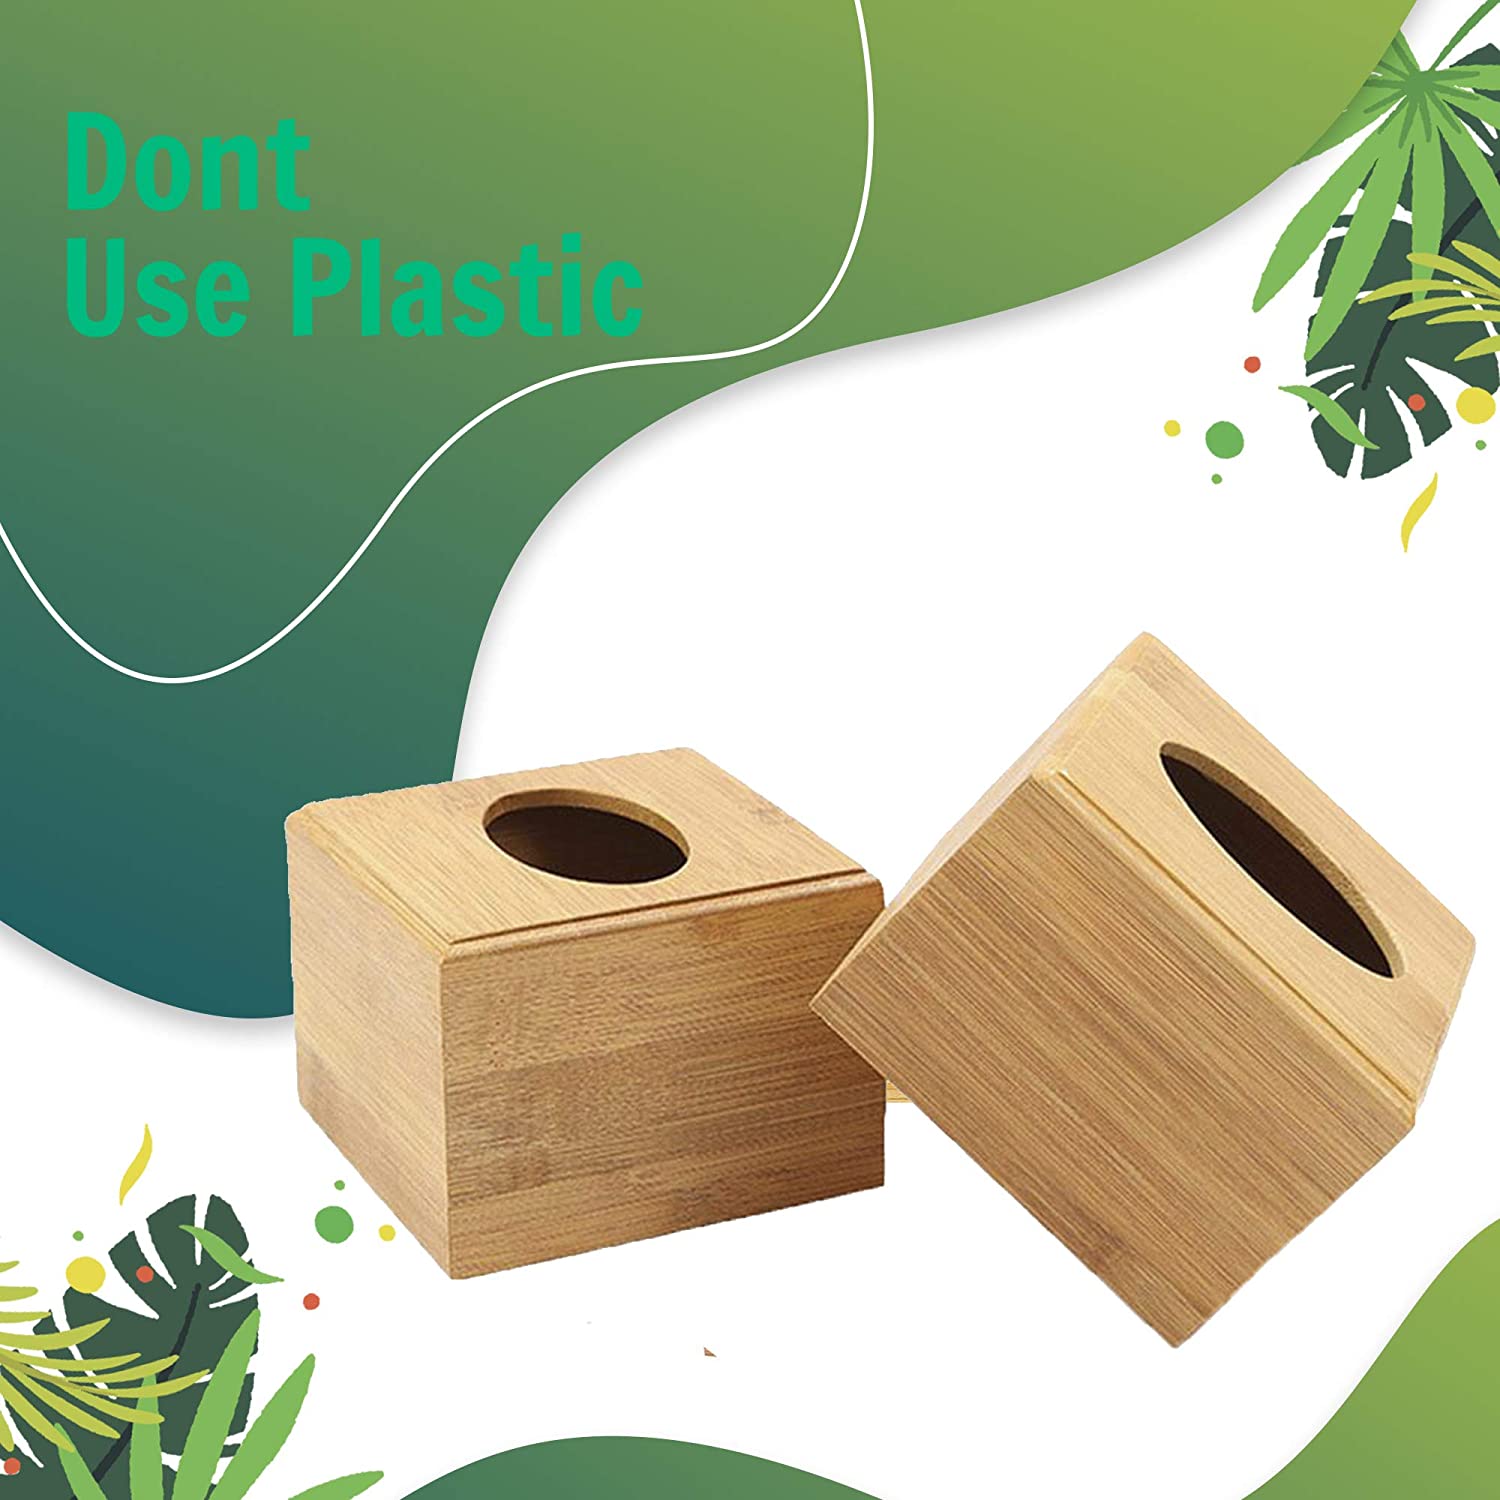 Square Bamboo Tissue Box Cover - Water Resistant - 16 X 14 X 14 cm